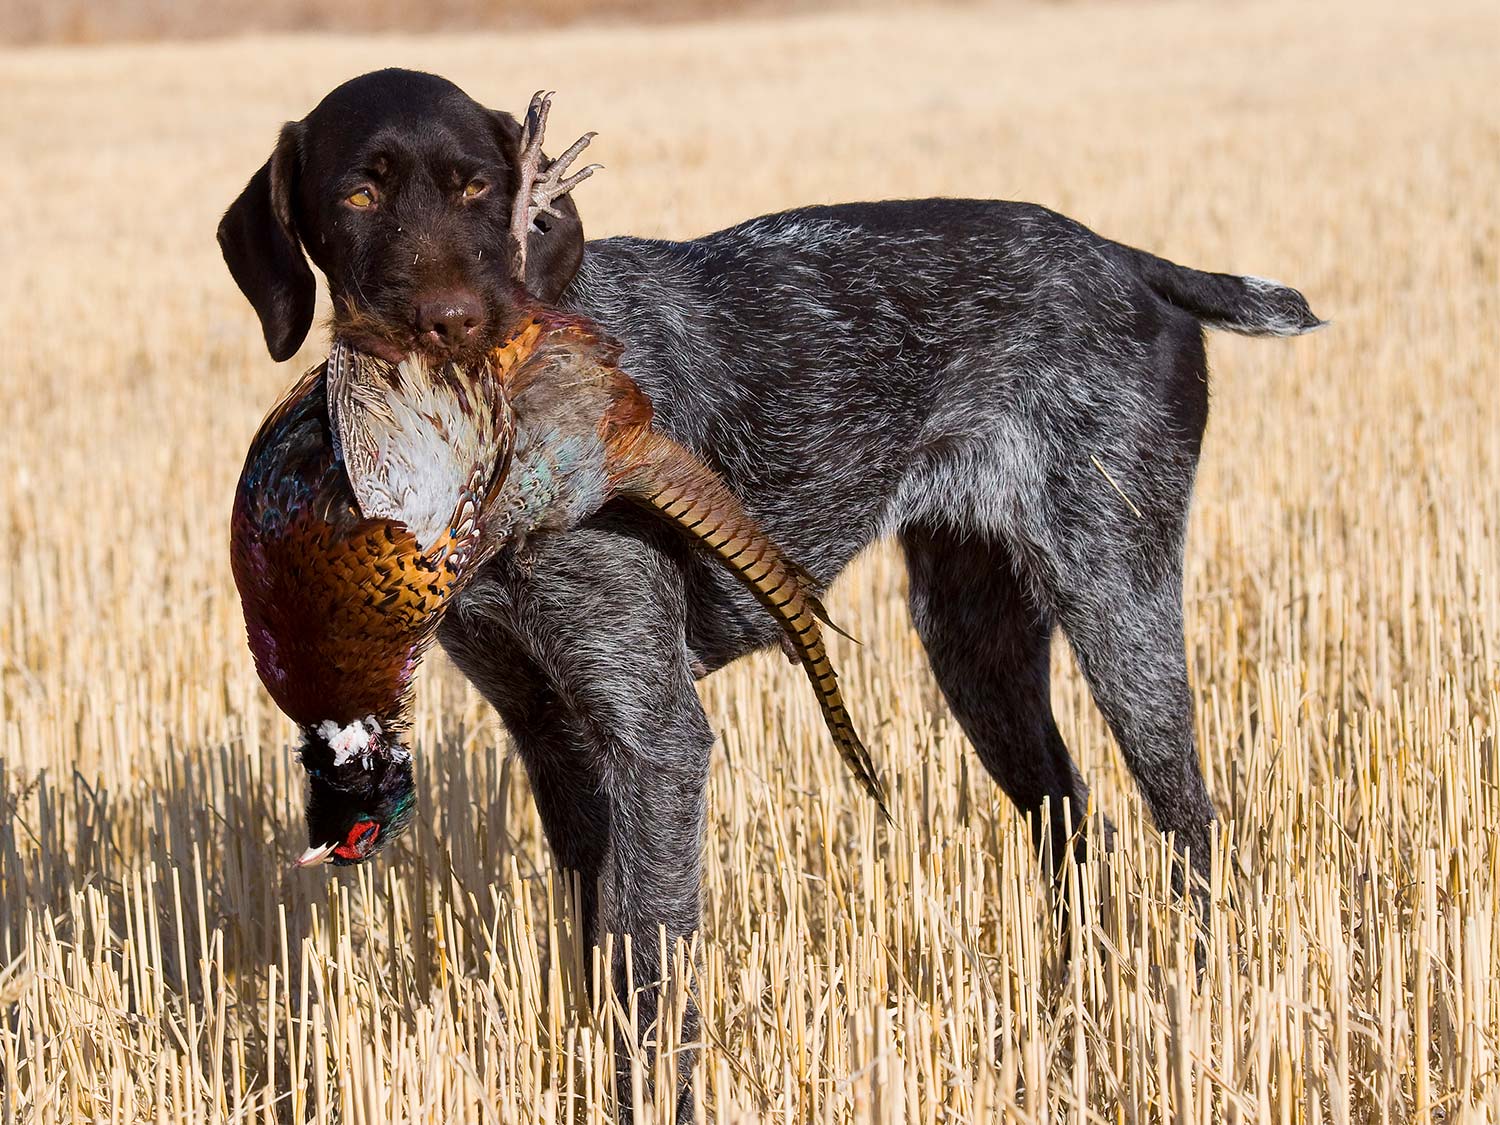 How To Put on a Choke Chain Before Training Your Hunting Dog